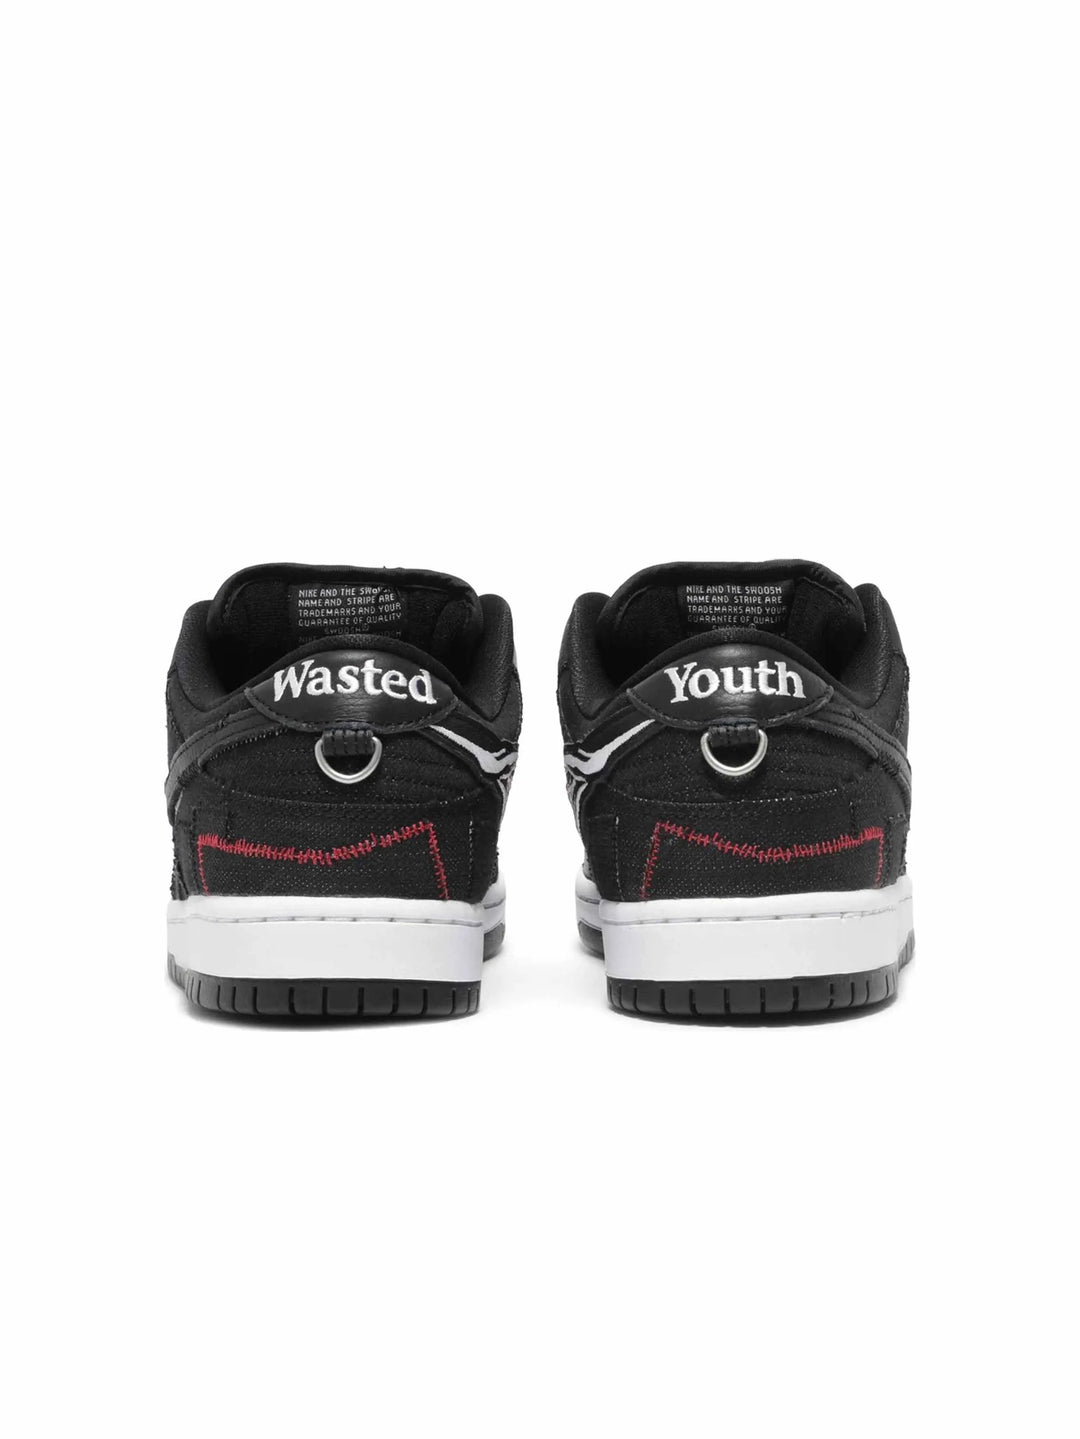 Nike SB Dunk Low Wasted Youth in Auckland, New Zealand - Shop name